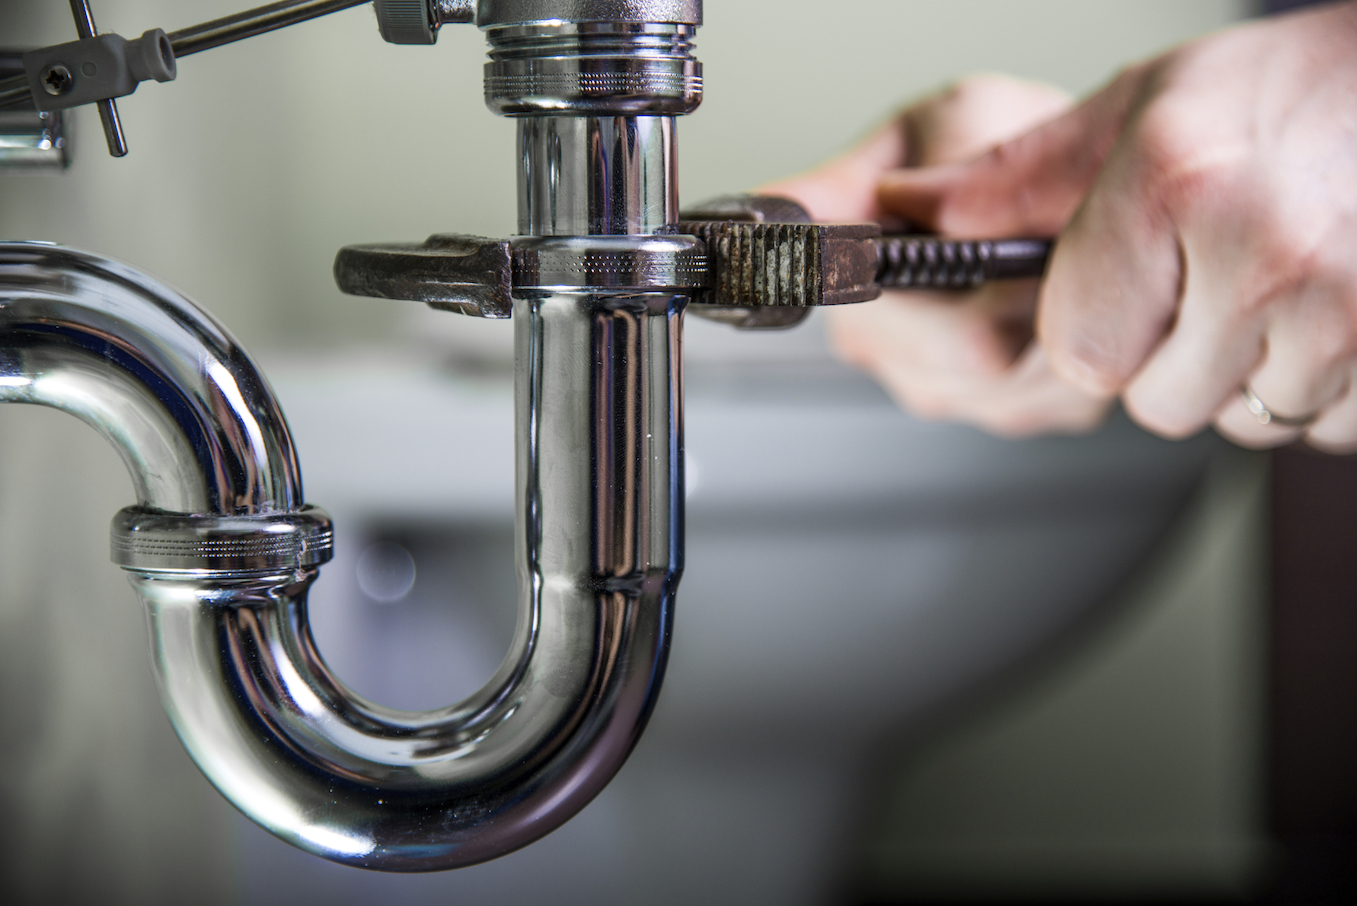 Quality Plumbing Solutions 2088 Kidd Rd, Nolensville Tennessee 37135